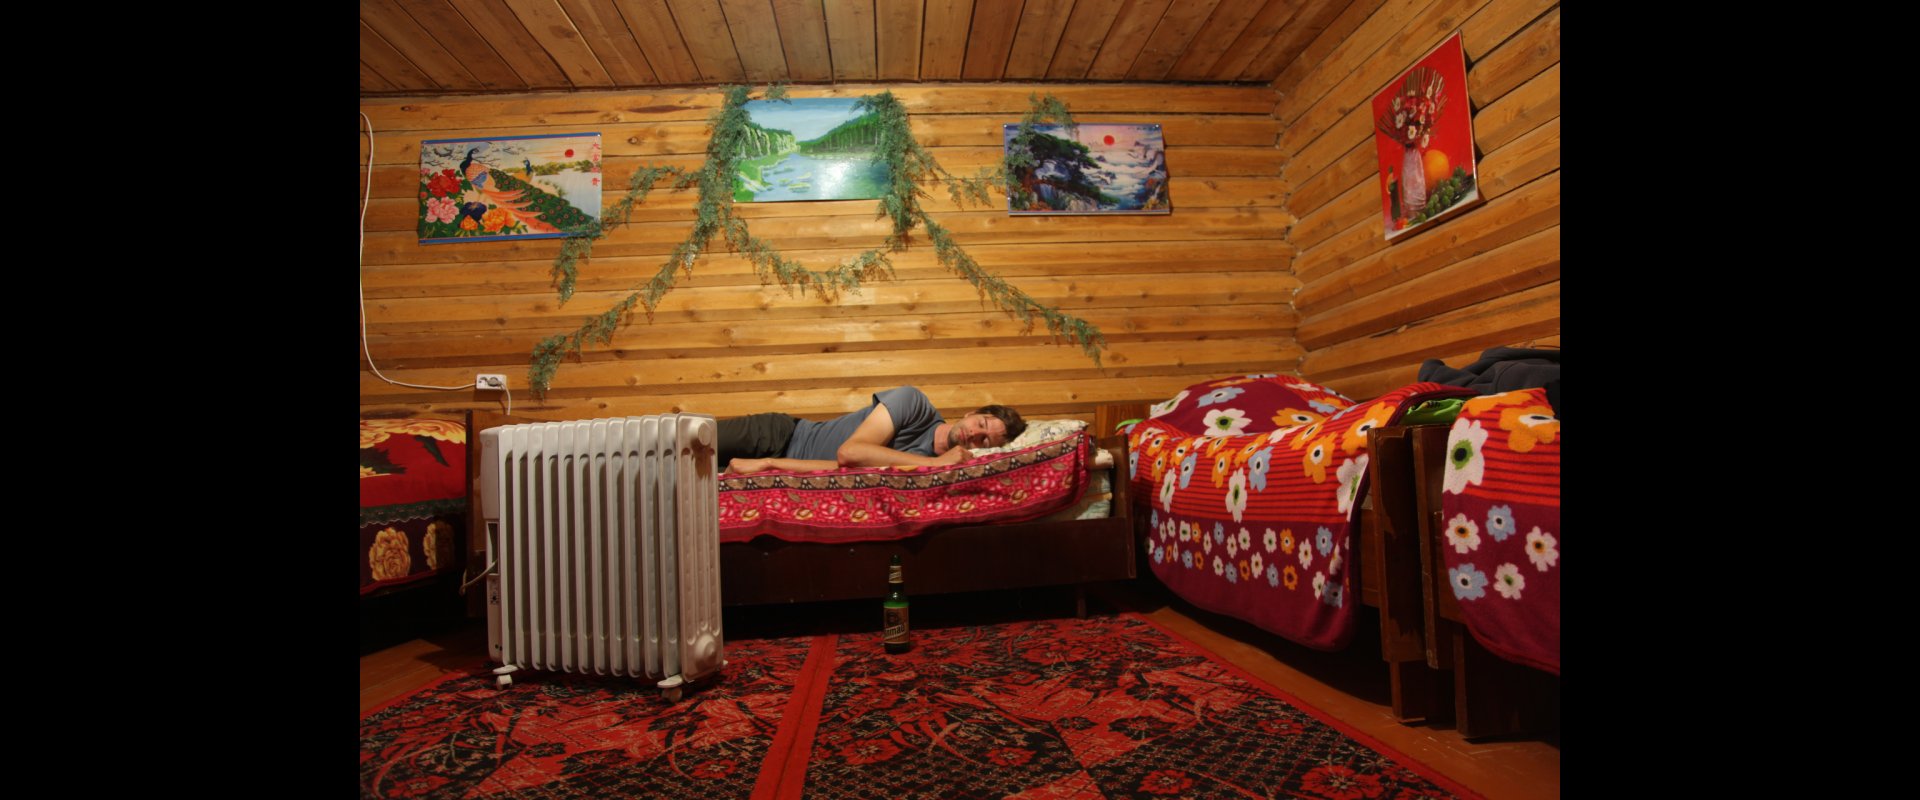 Grenzgang Reise-Reportage: Couchsurfing in Russland